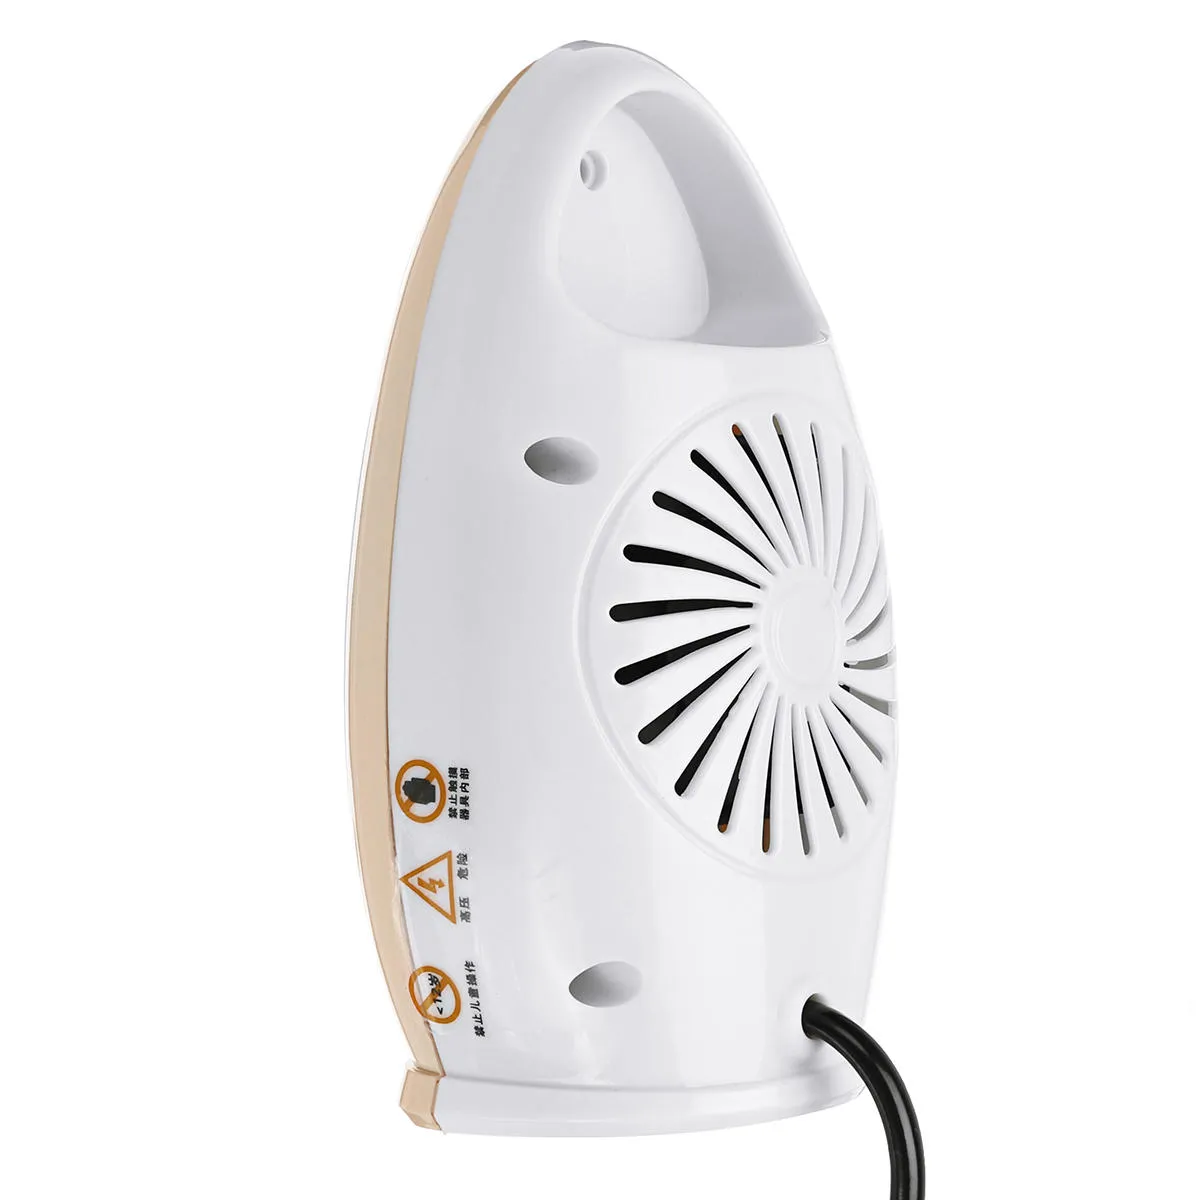 Energy Saving Mini Portable Heater For House For Home And Office 220V, 200W  Winter Warmer And Dryer In Gold From Gearbestshop, $6.54